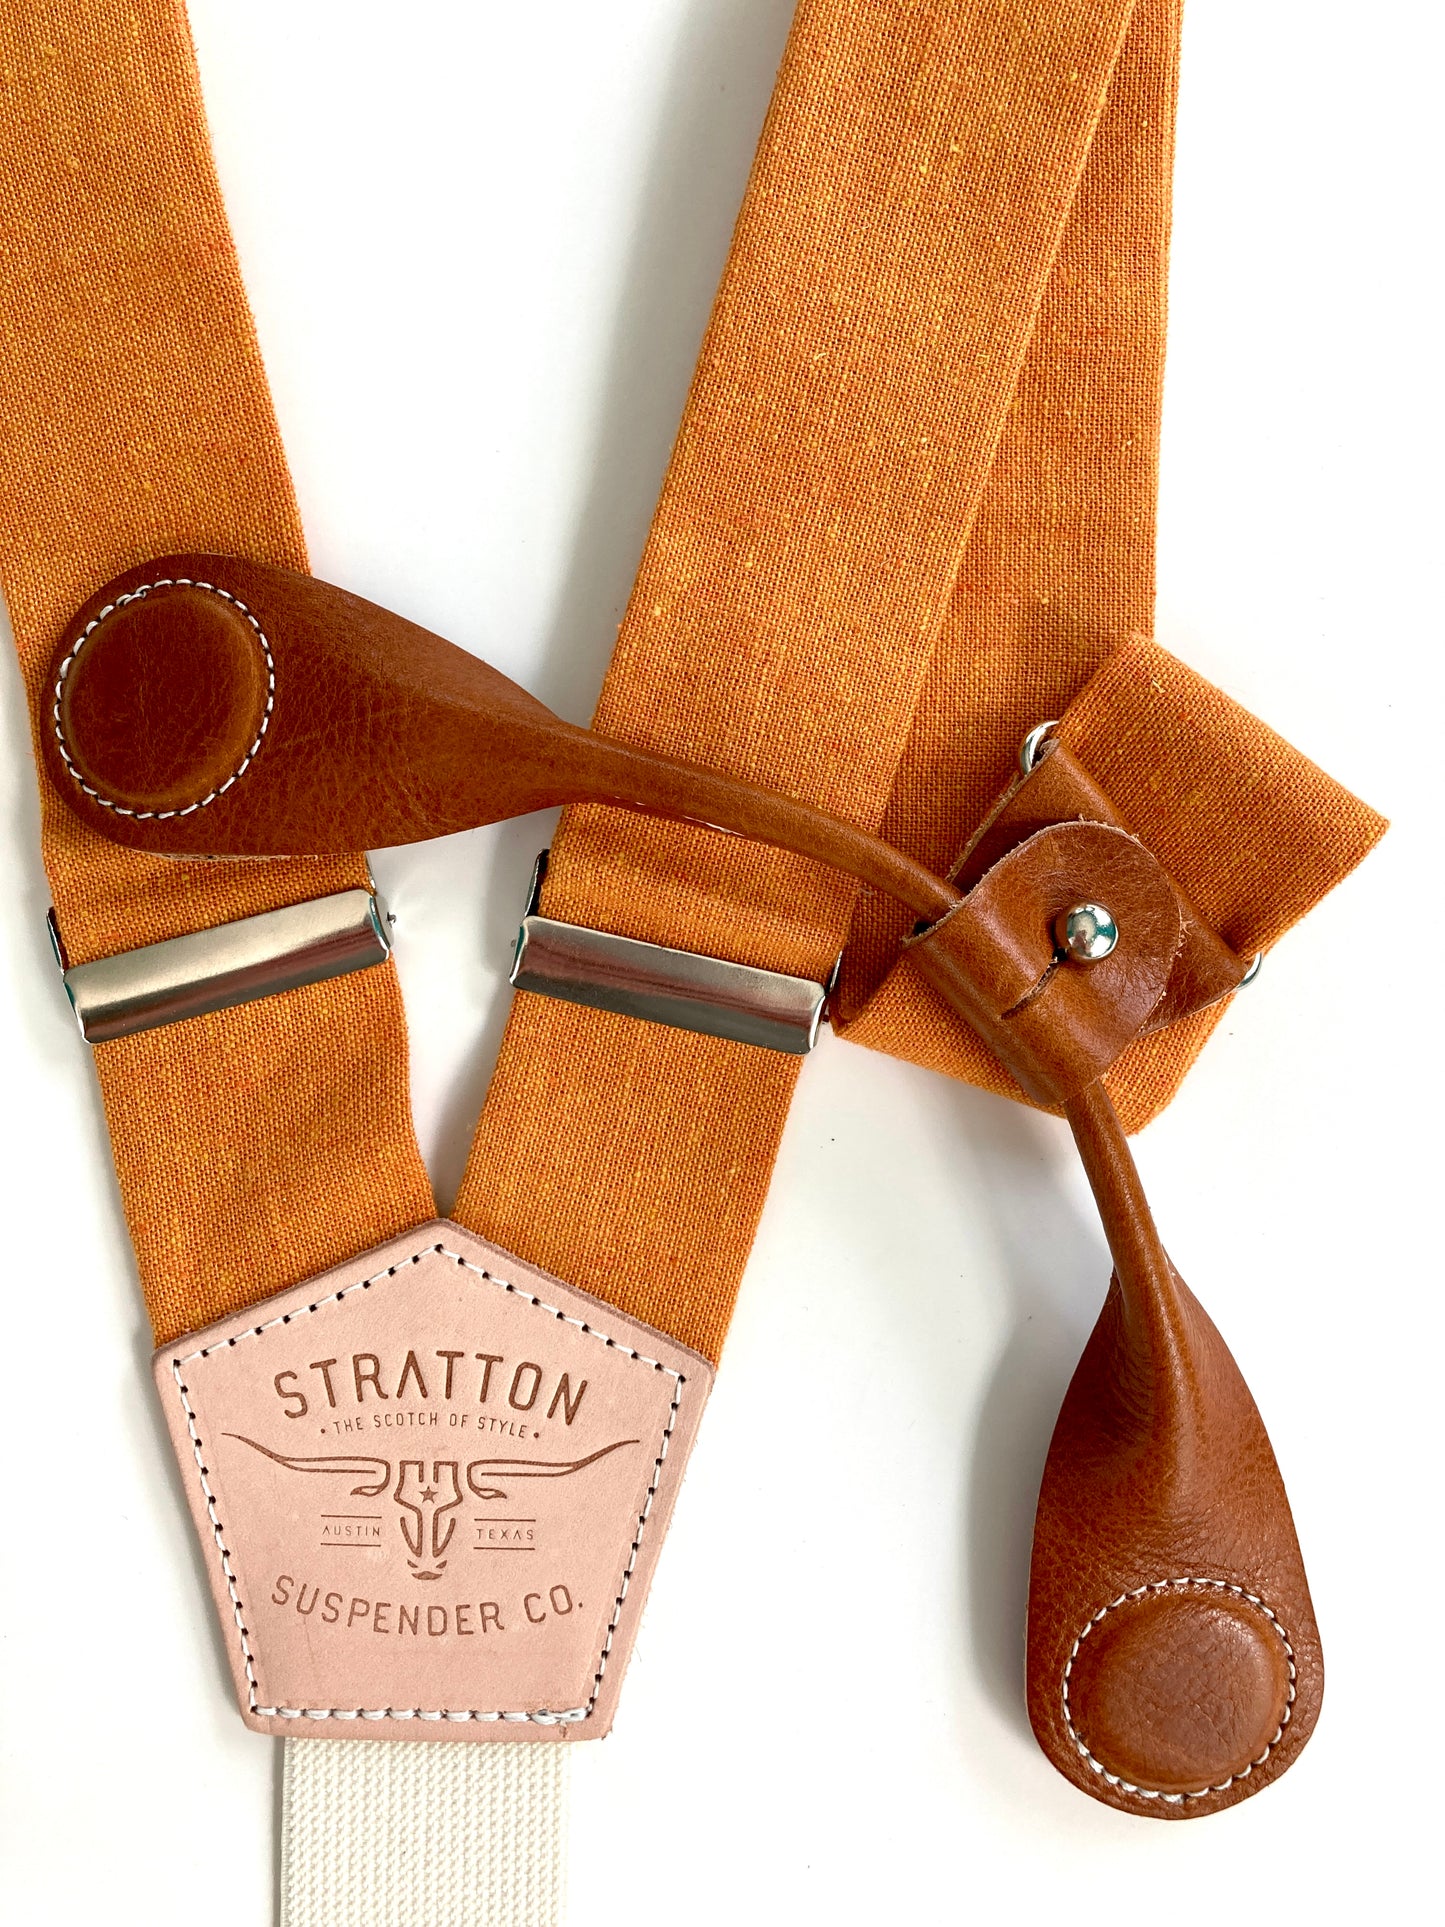 Stratton Suspender Co. features the orange linen suspenders on veg tan shoulder leather with cream colored elastic back strap for the Fall 2022 suspenders collection Magnetic Stratton Suspender clasps in Tan Pontedero Italian leather hand-picked by Stratton Suspender Co.